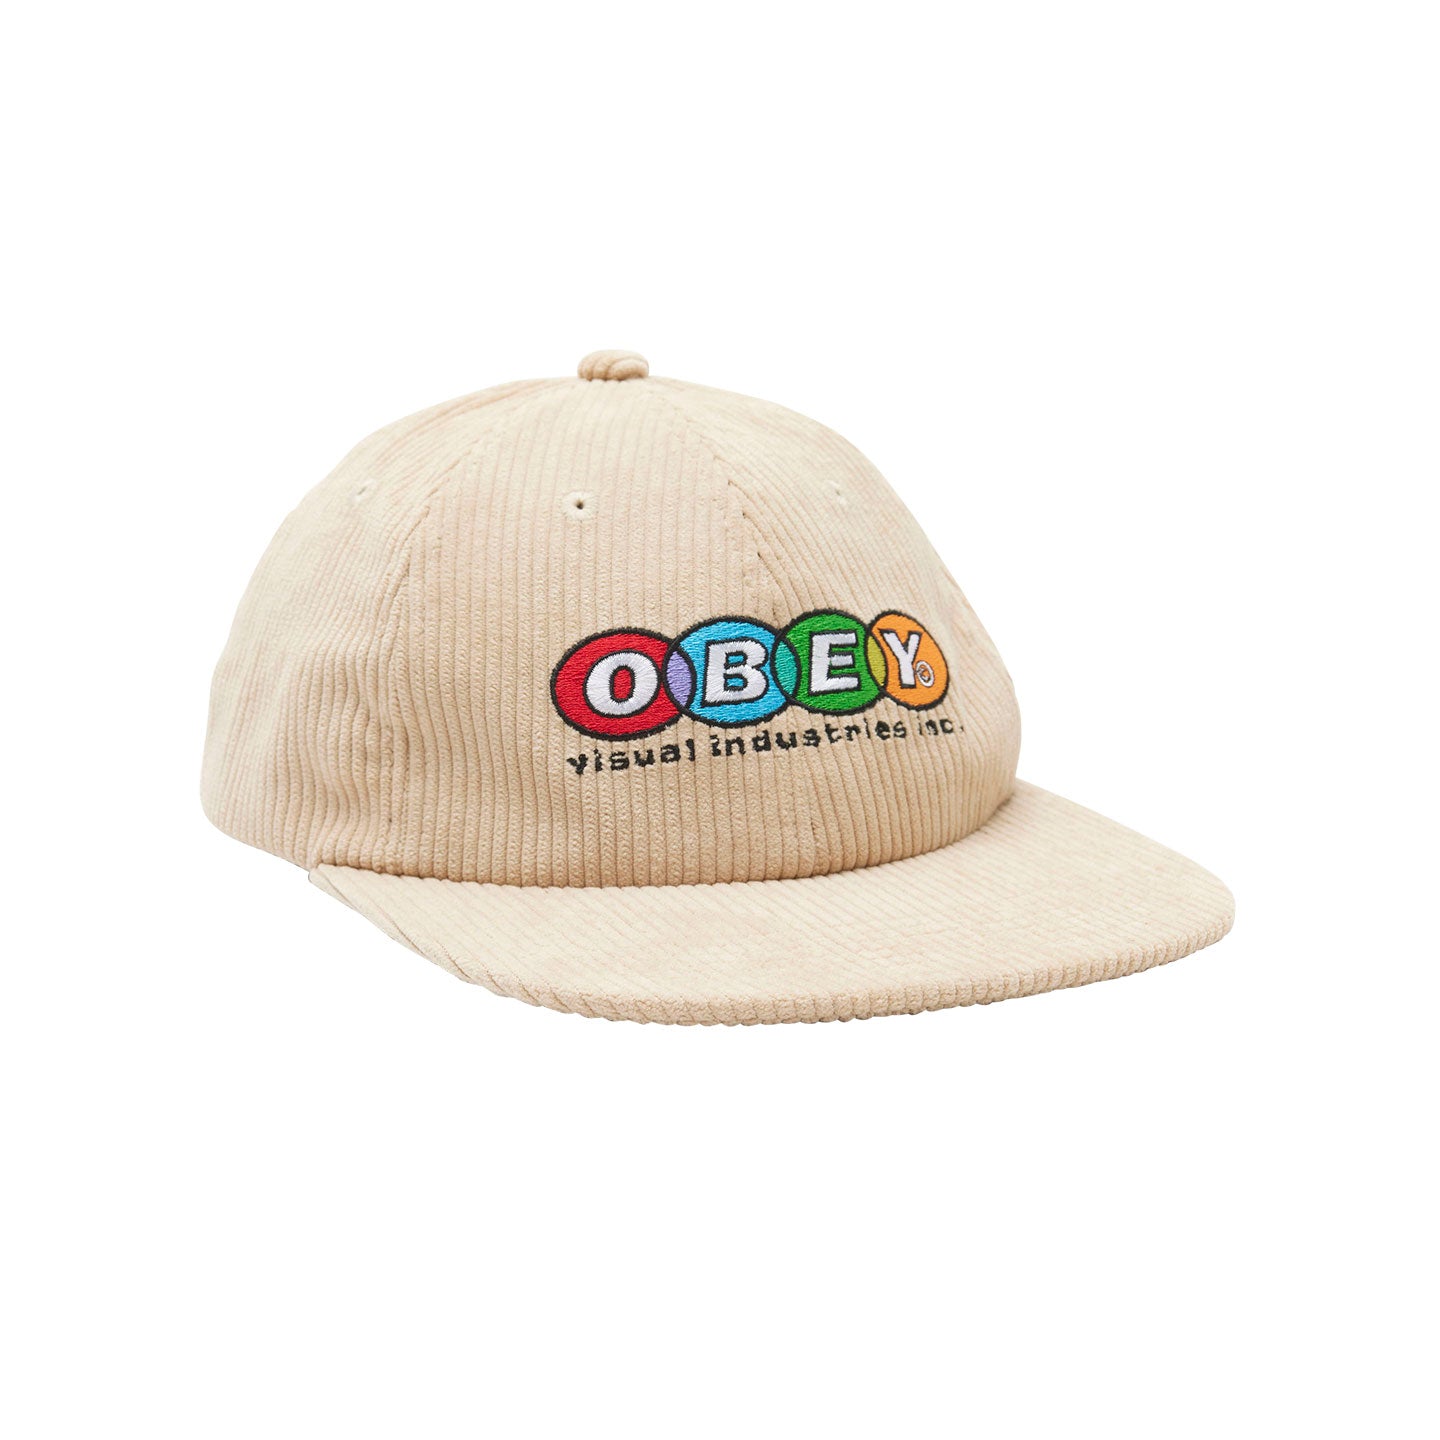 OBEY Industries 6 Panel Snap